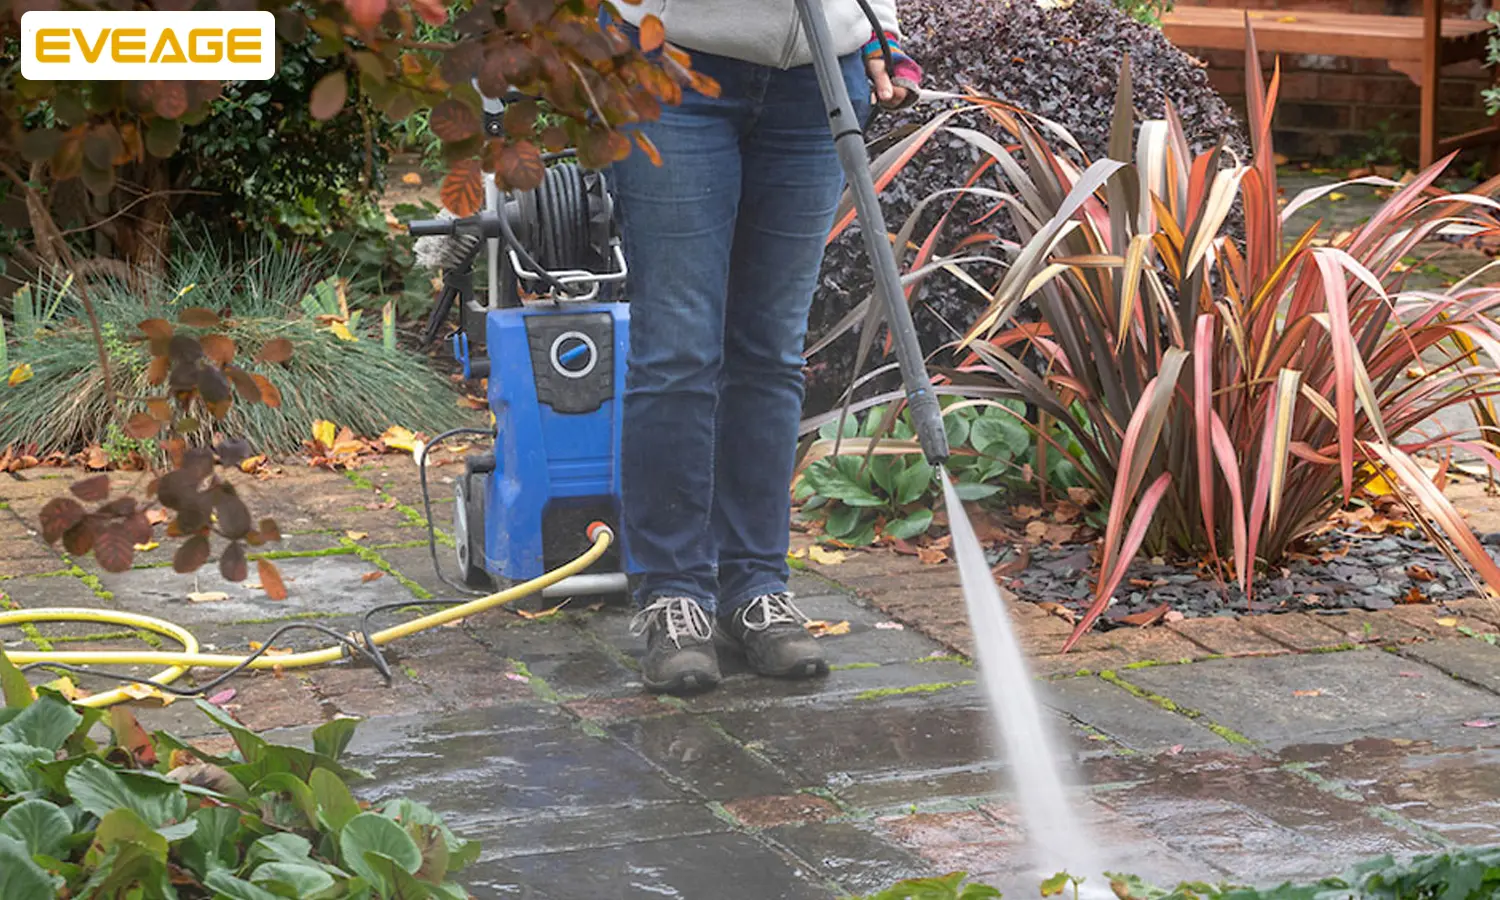 How many PSI Pressure Washer